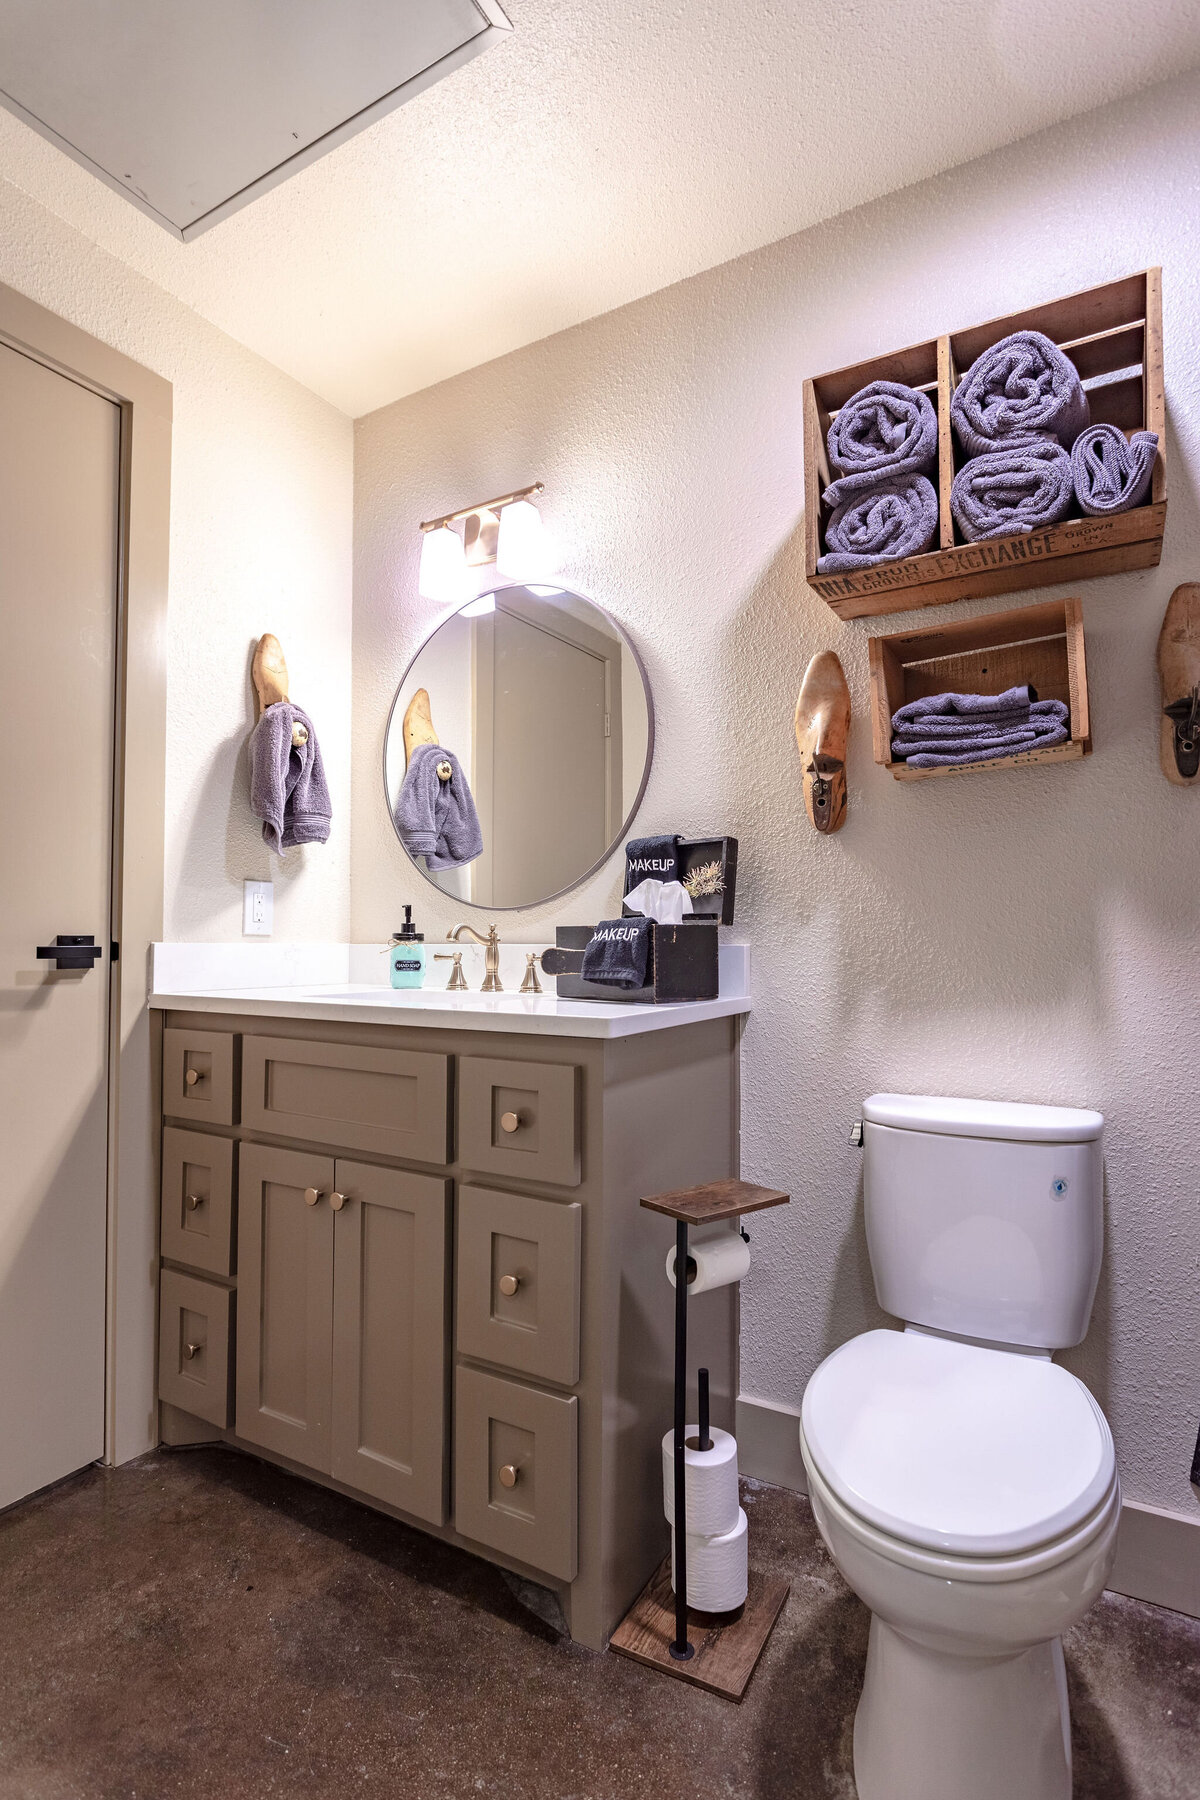 Bathroom with large vanity in this 2-bedroom, 2-bathroom vacation rental condo for four guests in the historic Behrens building with free parking, free wifi, vintage decor, and easy access to Baylor University, Magnolia Silos, and Cameron Park Zoo in downtown Waco, TX.